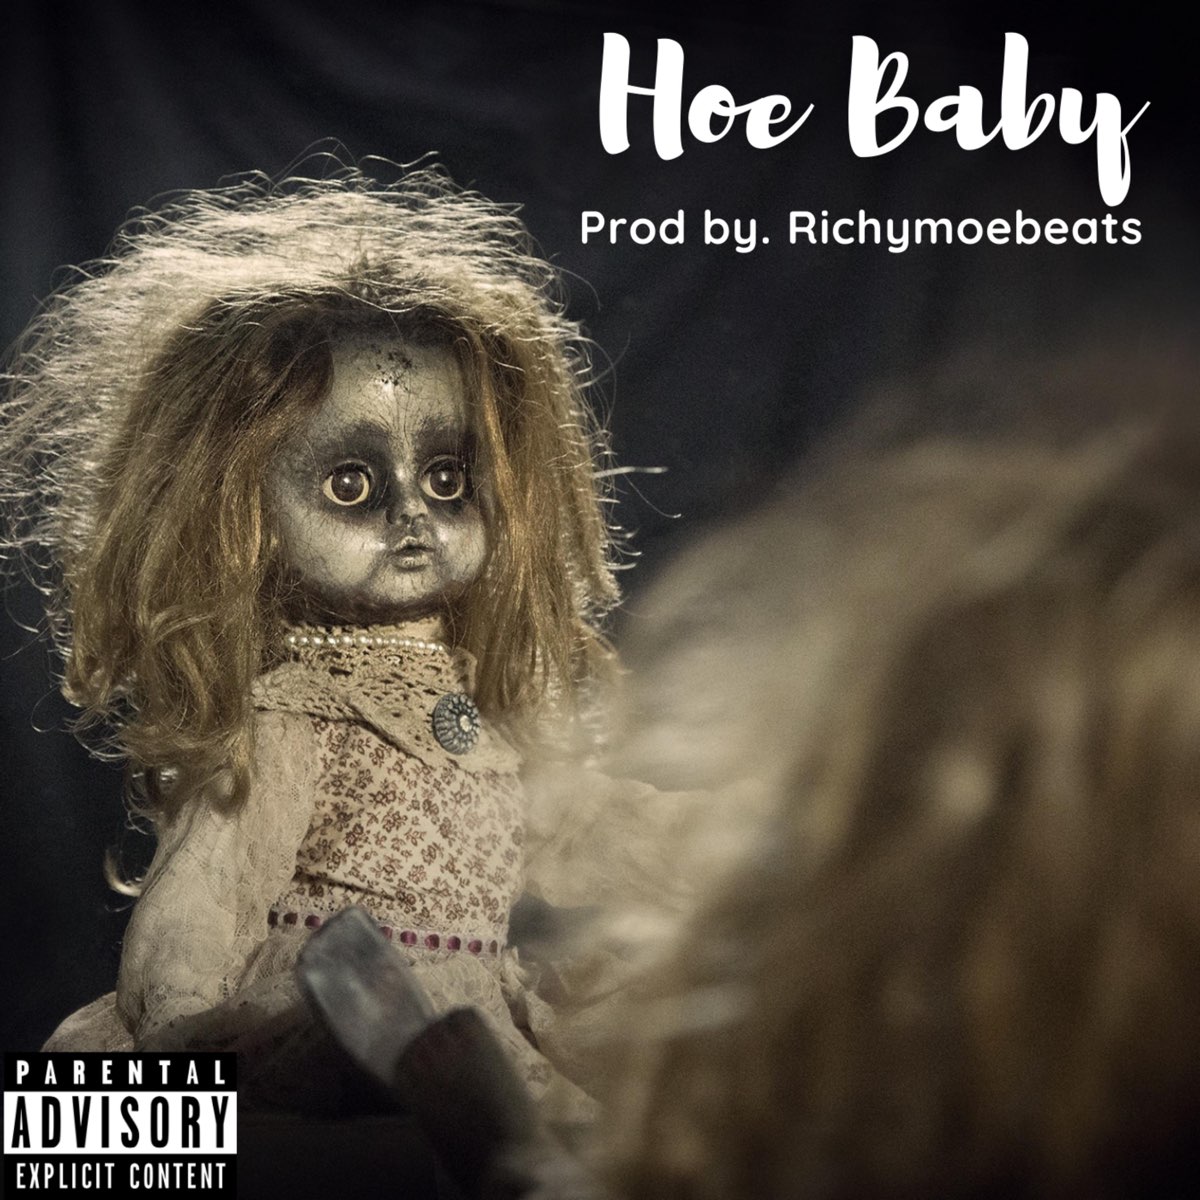 Hoe Baby - Single by Da Grenchie on Apple Music